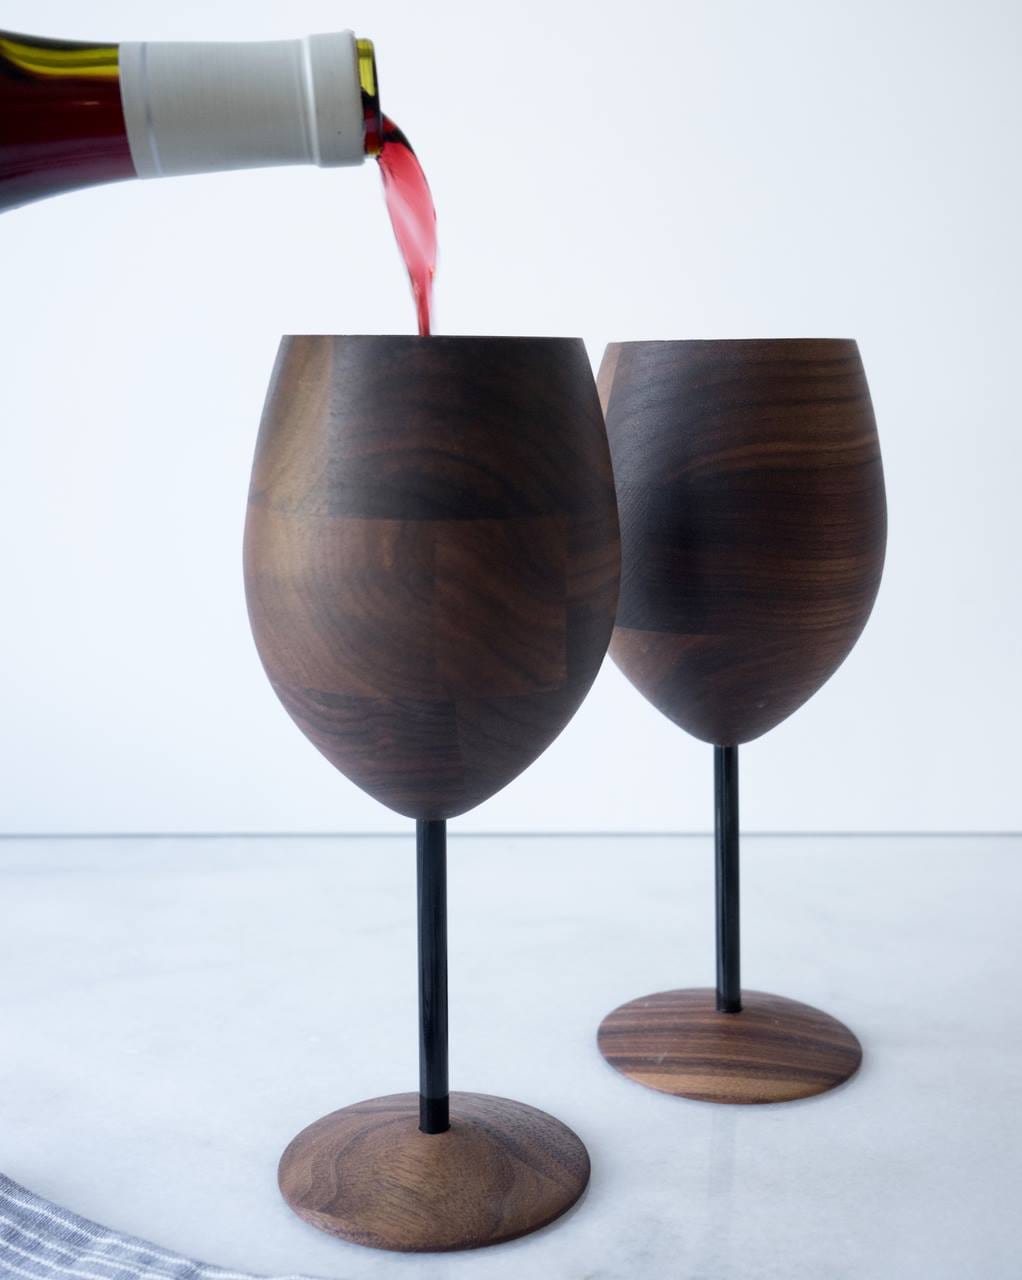 image of wooden wine glasses